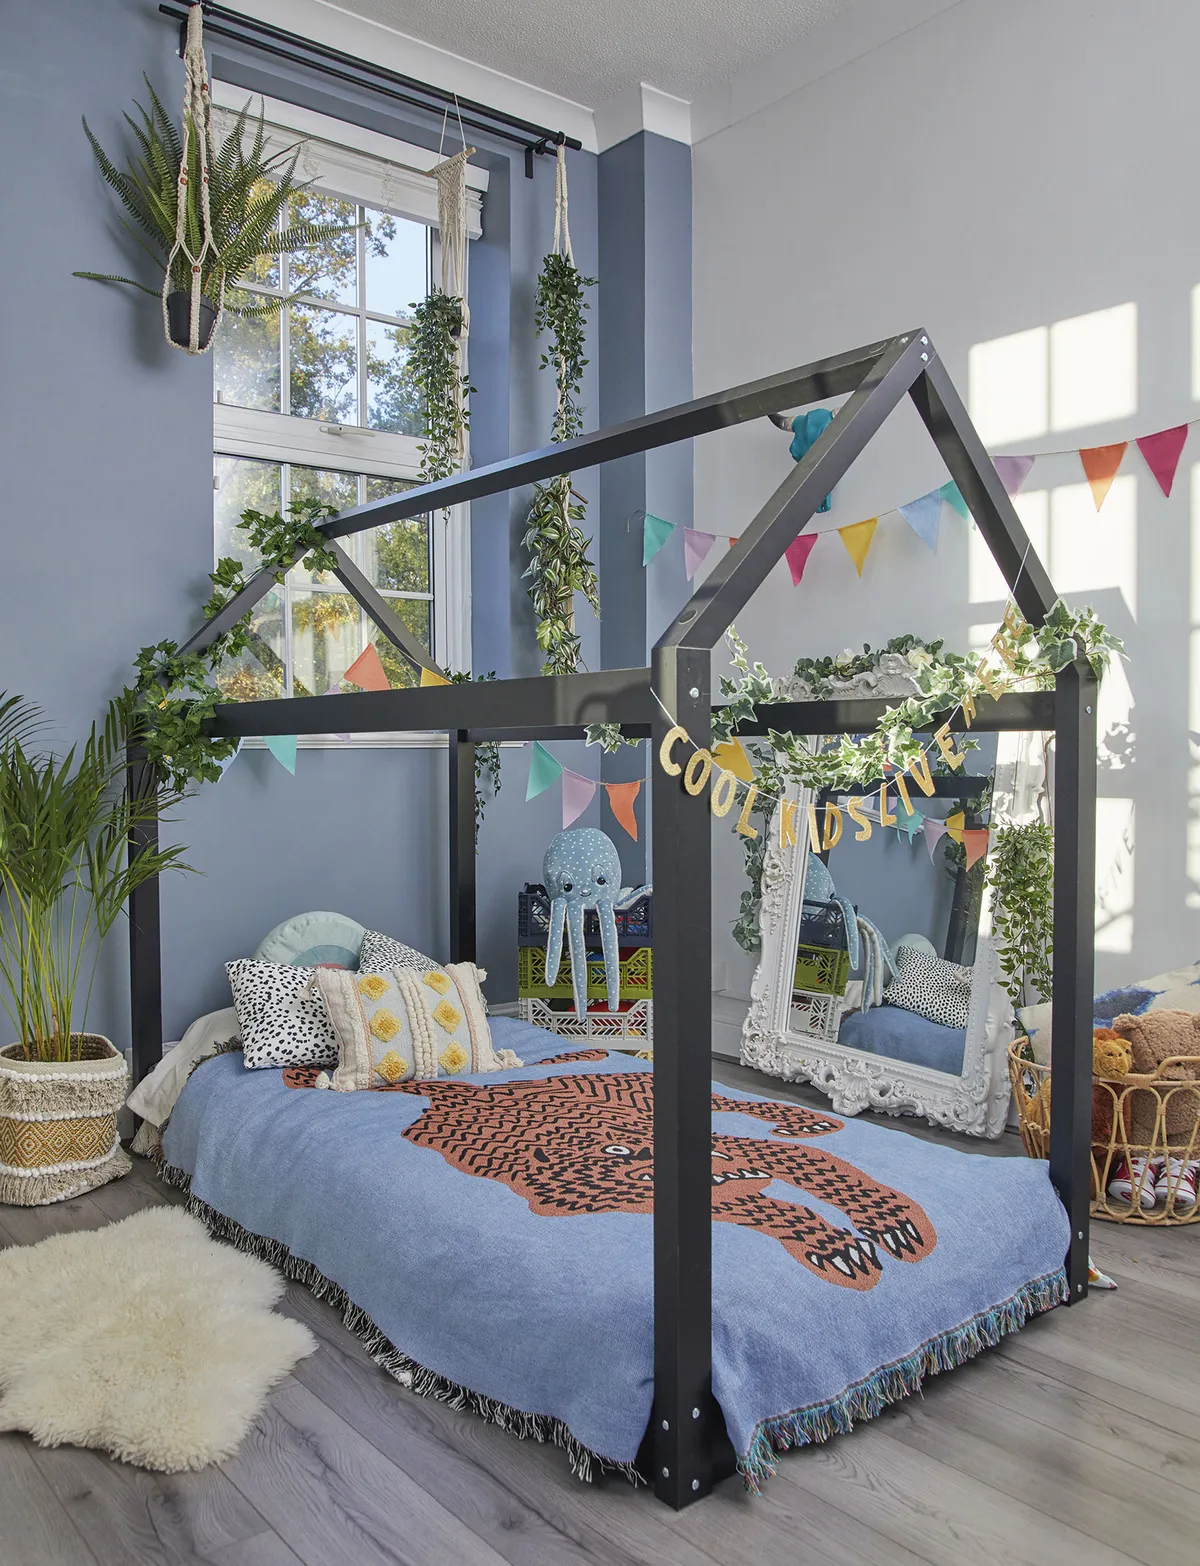 ‘I saw this house bed in Cox & Cox and thought how much fun it would be for Cooper as a place to play as well as sleep. The dogs seem to love it in here too’